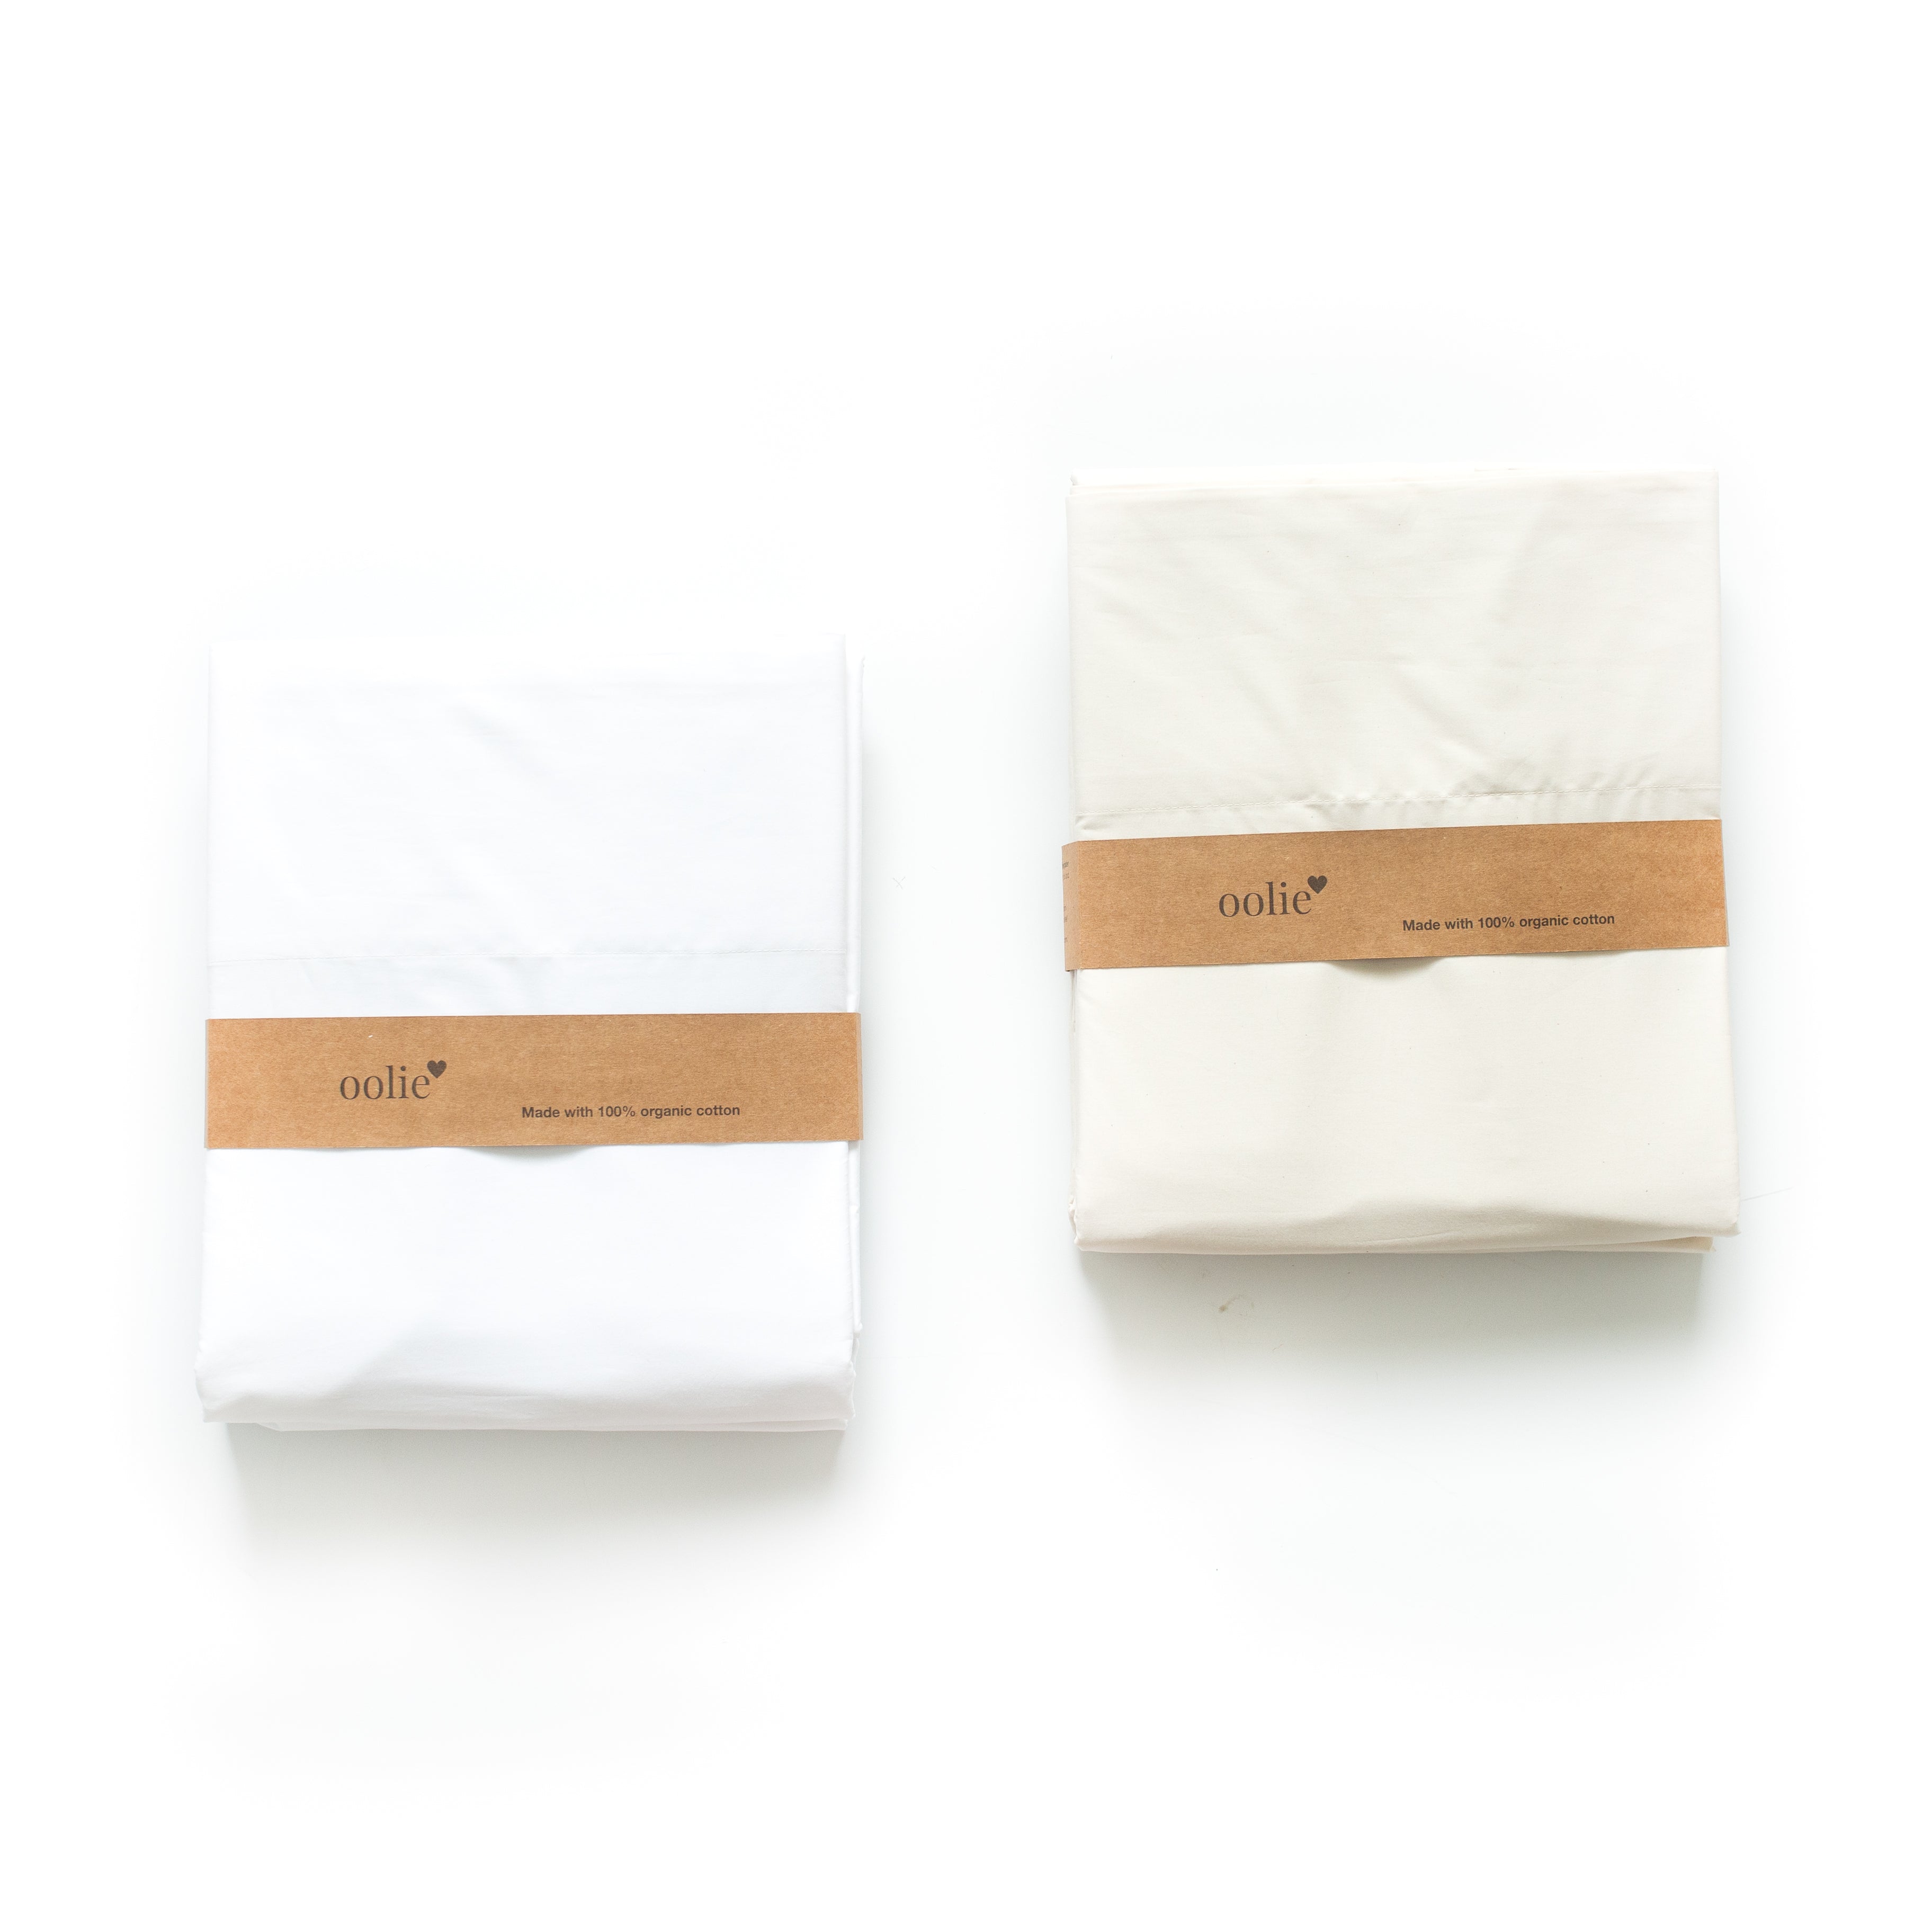 Two packaged Oolie organic cotton sheet sets on a white background. One sheet set is white, and the other is natural, unbleached cotton.